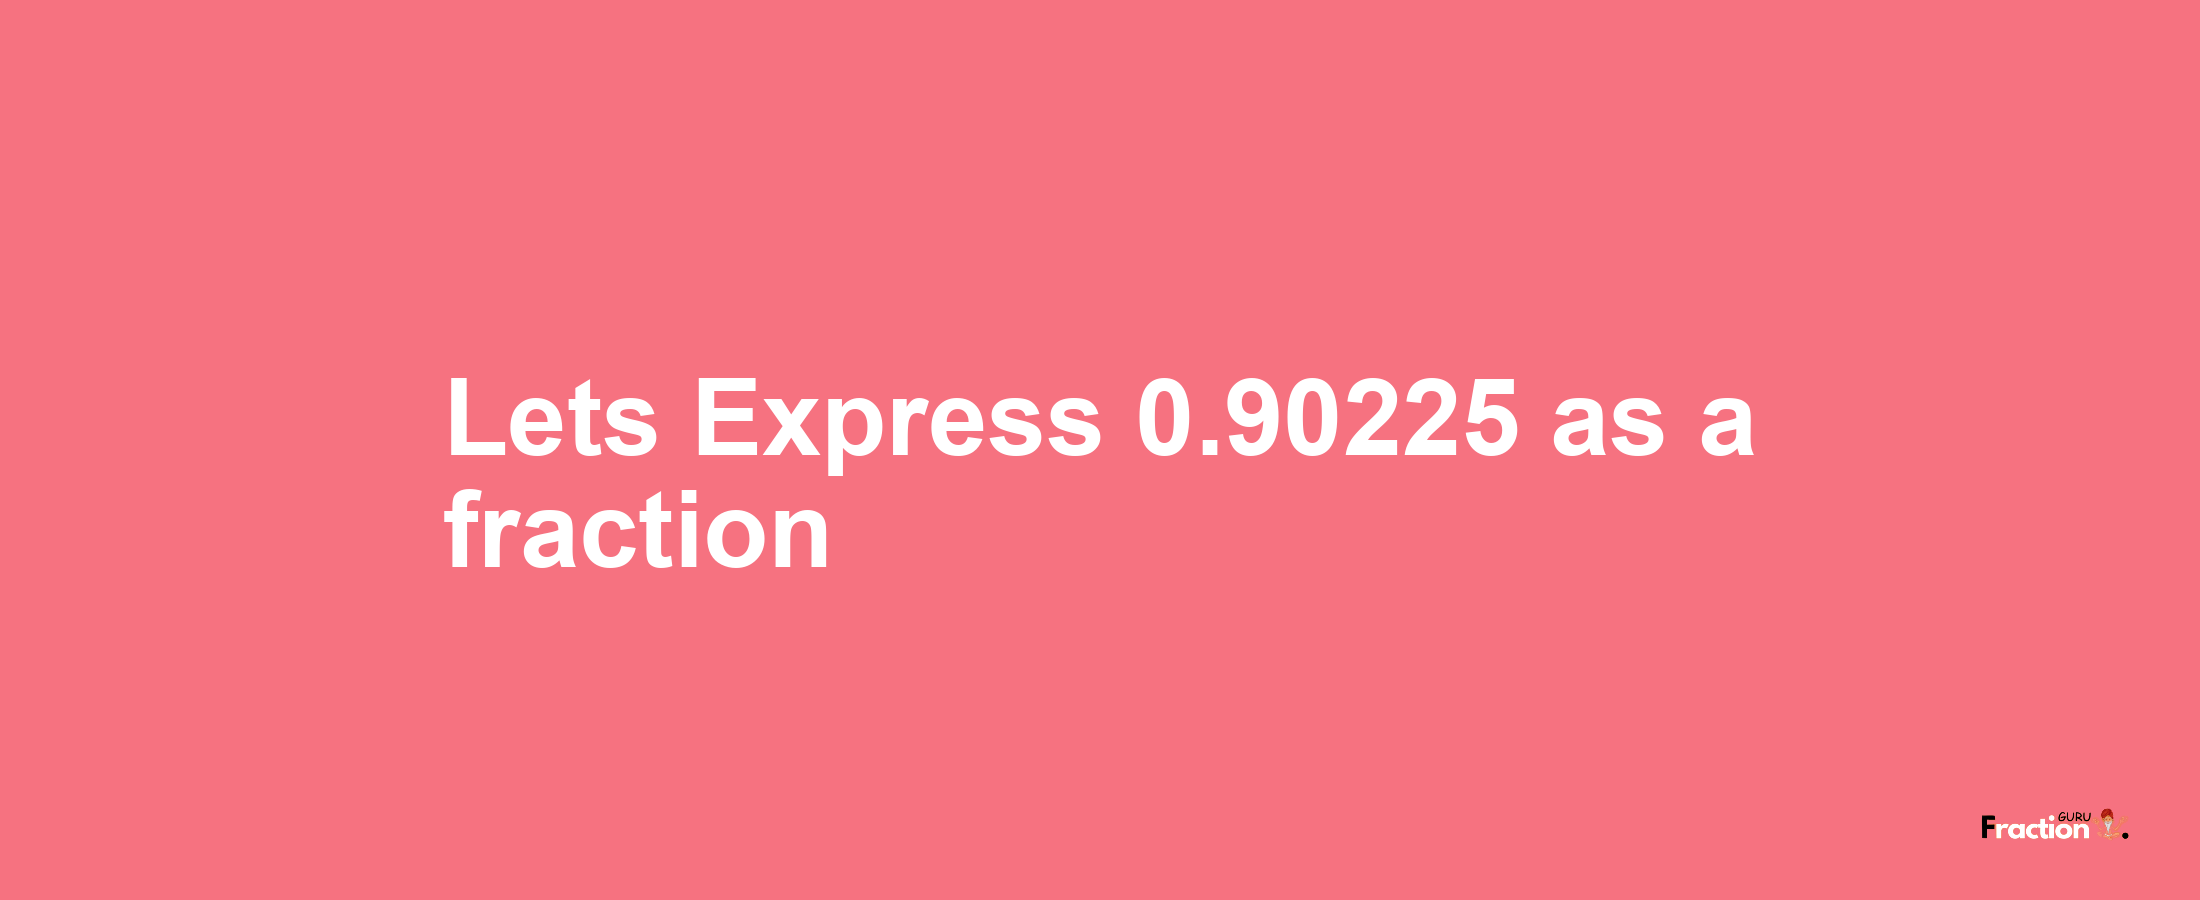 Lets Express 0.90225 as afraction